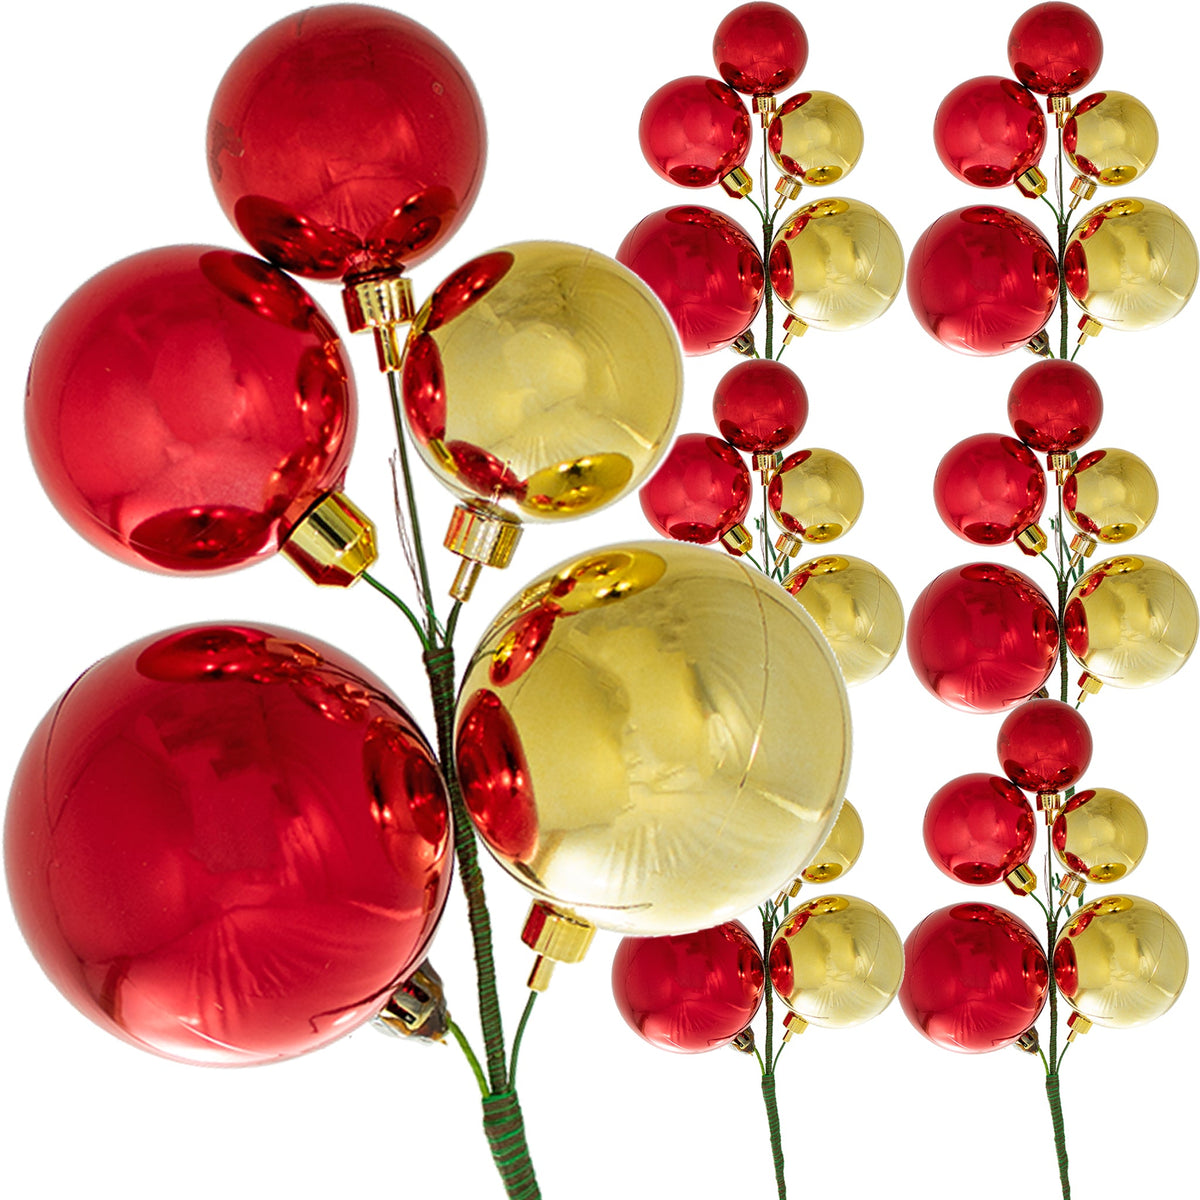 The Hollister Christmas Ball Ornament Cluster with Shiny Red and Shiny Gold Ball Ornaments sold in a set of 6.